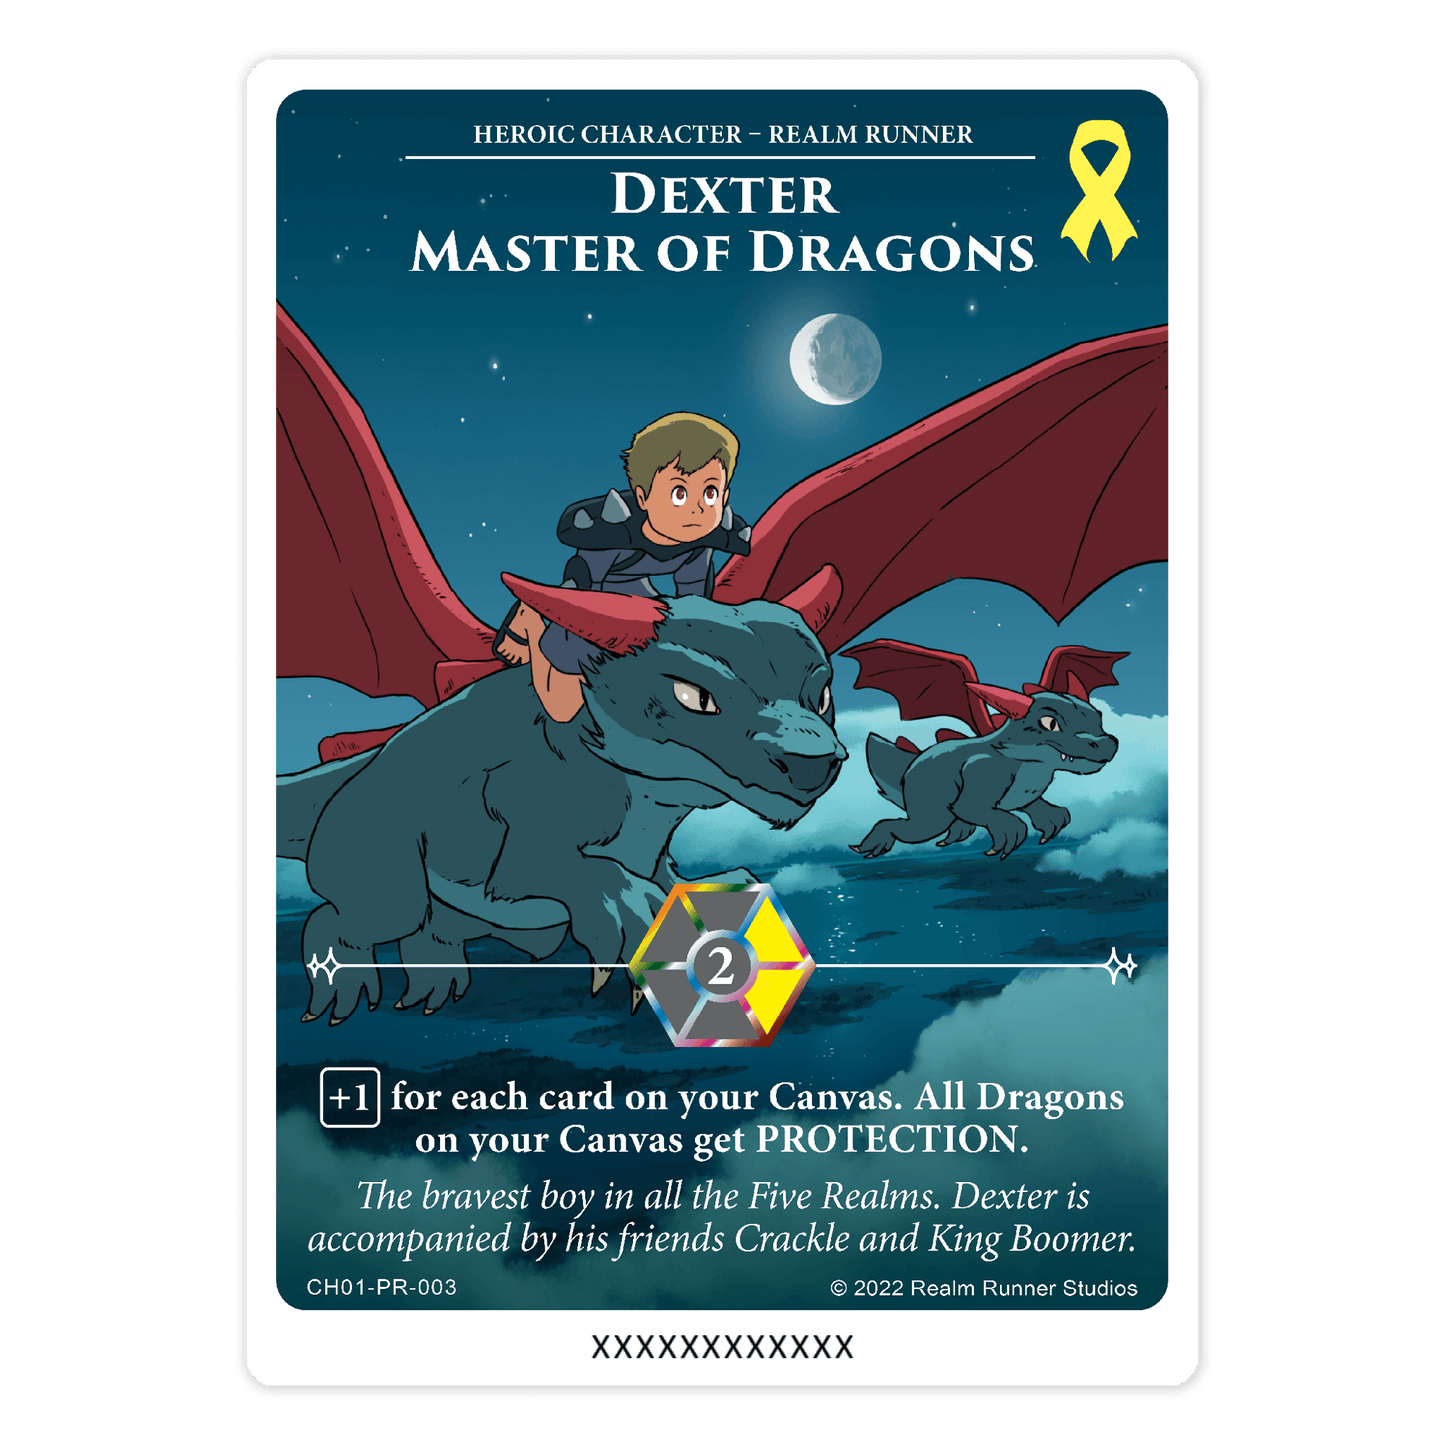 Dexter Master of Dragons Limited Edition Charity Card